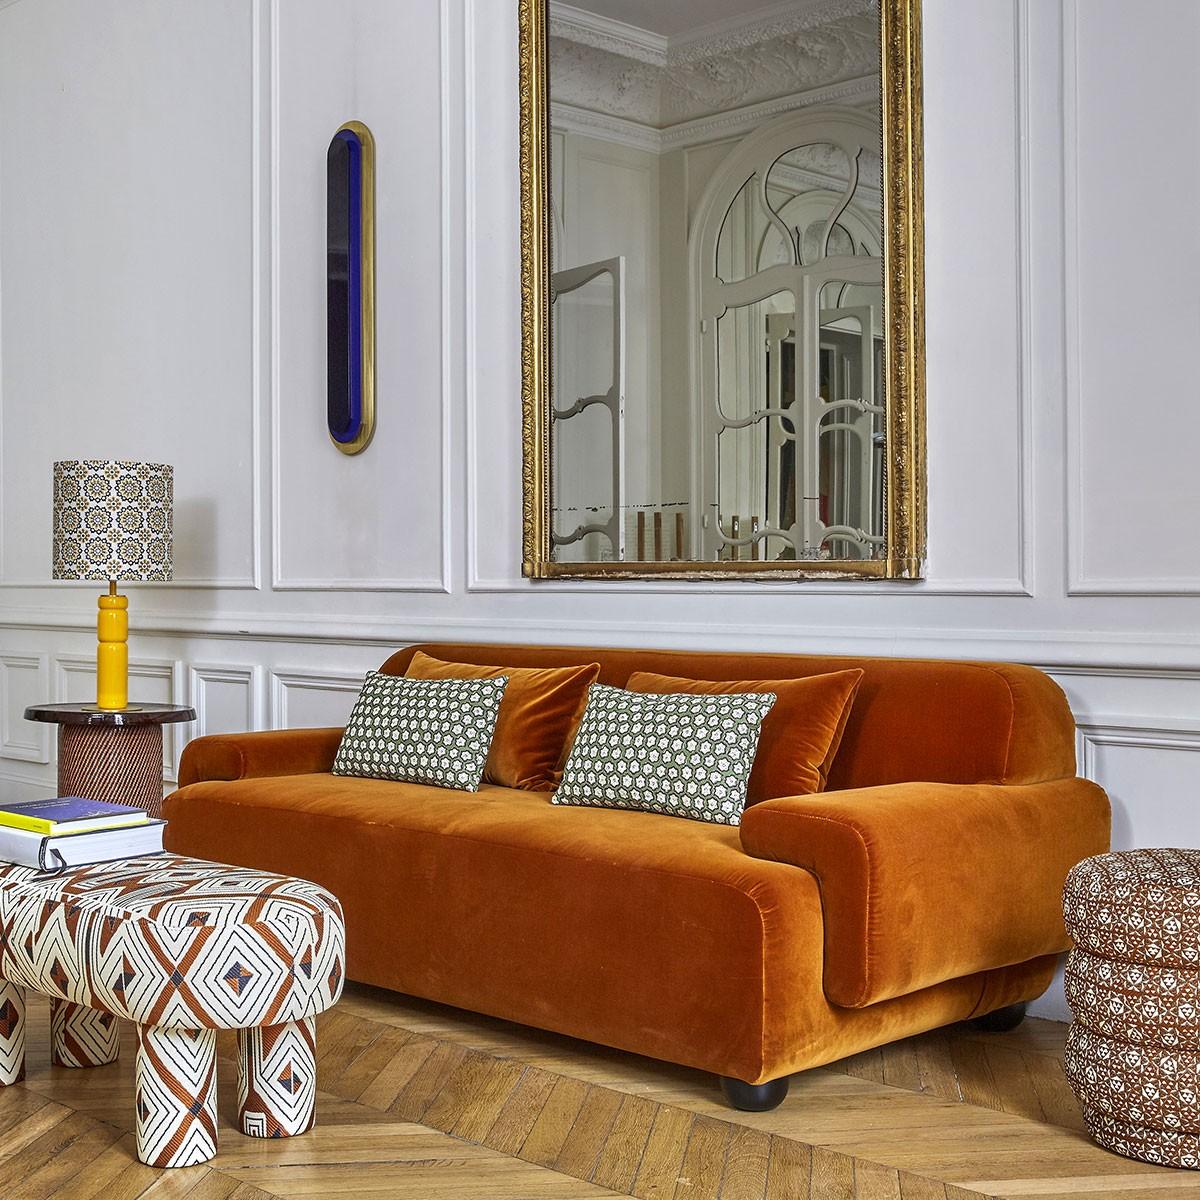 Popus Editions Lena 2.5 seater sofa in ocher London linen fabric

It looks like it's straight out of a movie, with its generous curves and wide armrests. It is a real invitation to spend long Sundays with the family, comfortably seated in front of